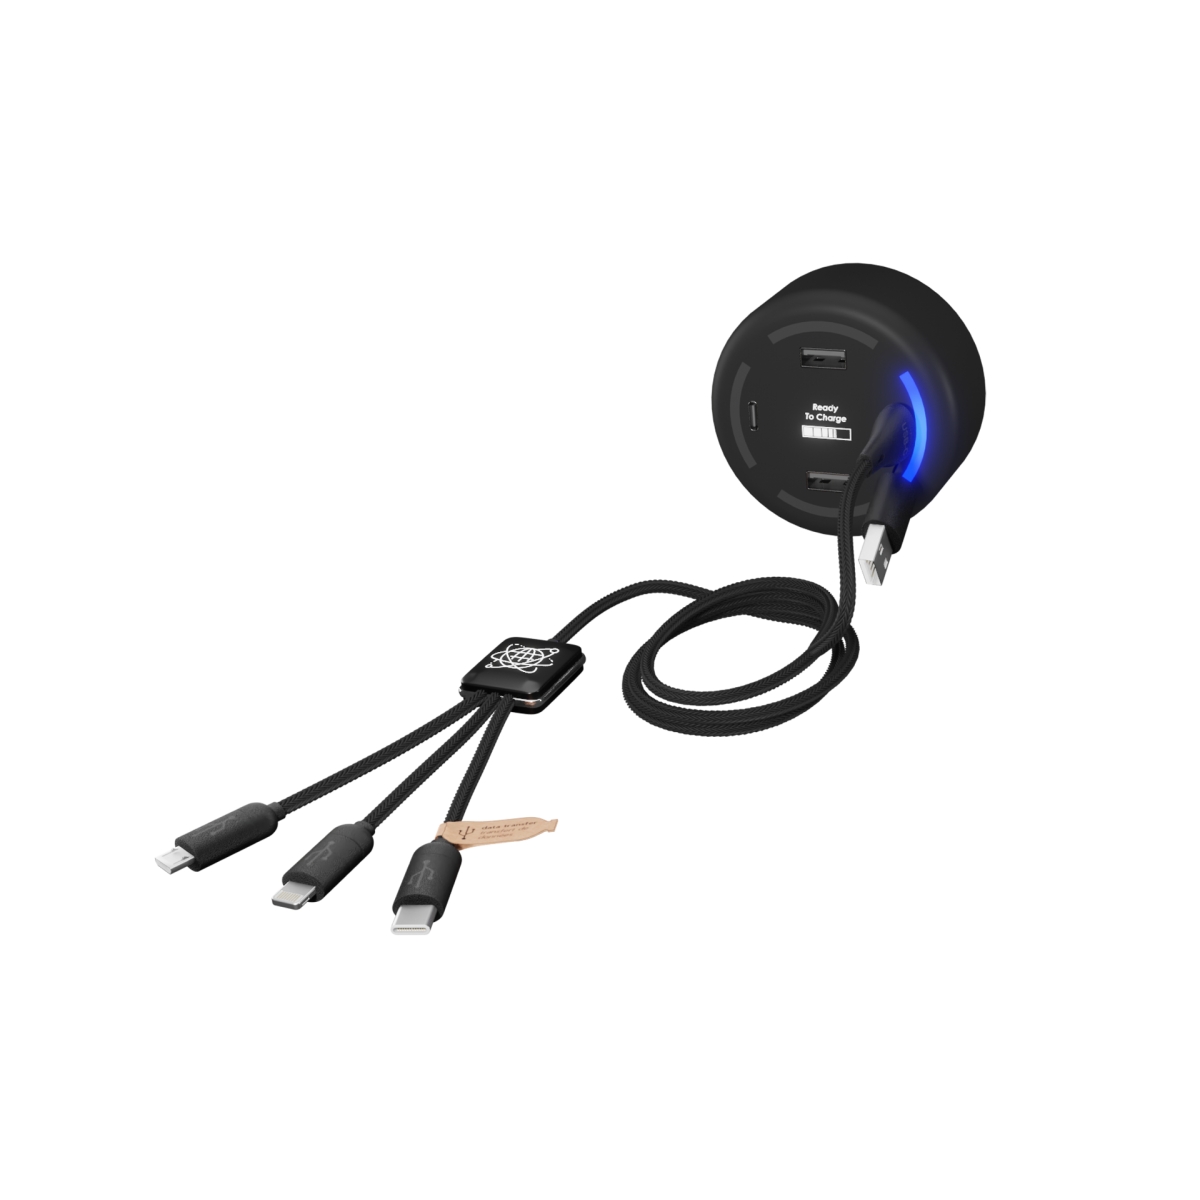 H11 - Smart home charger